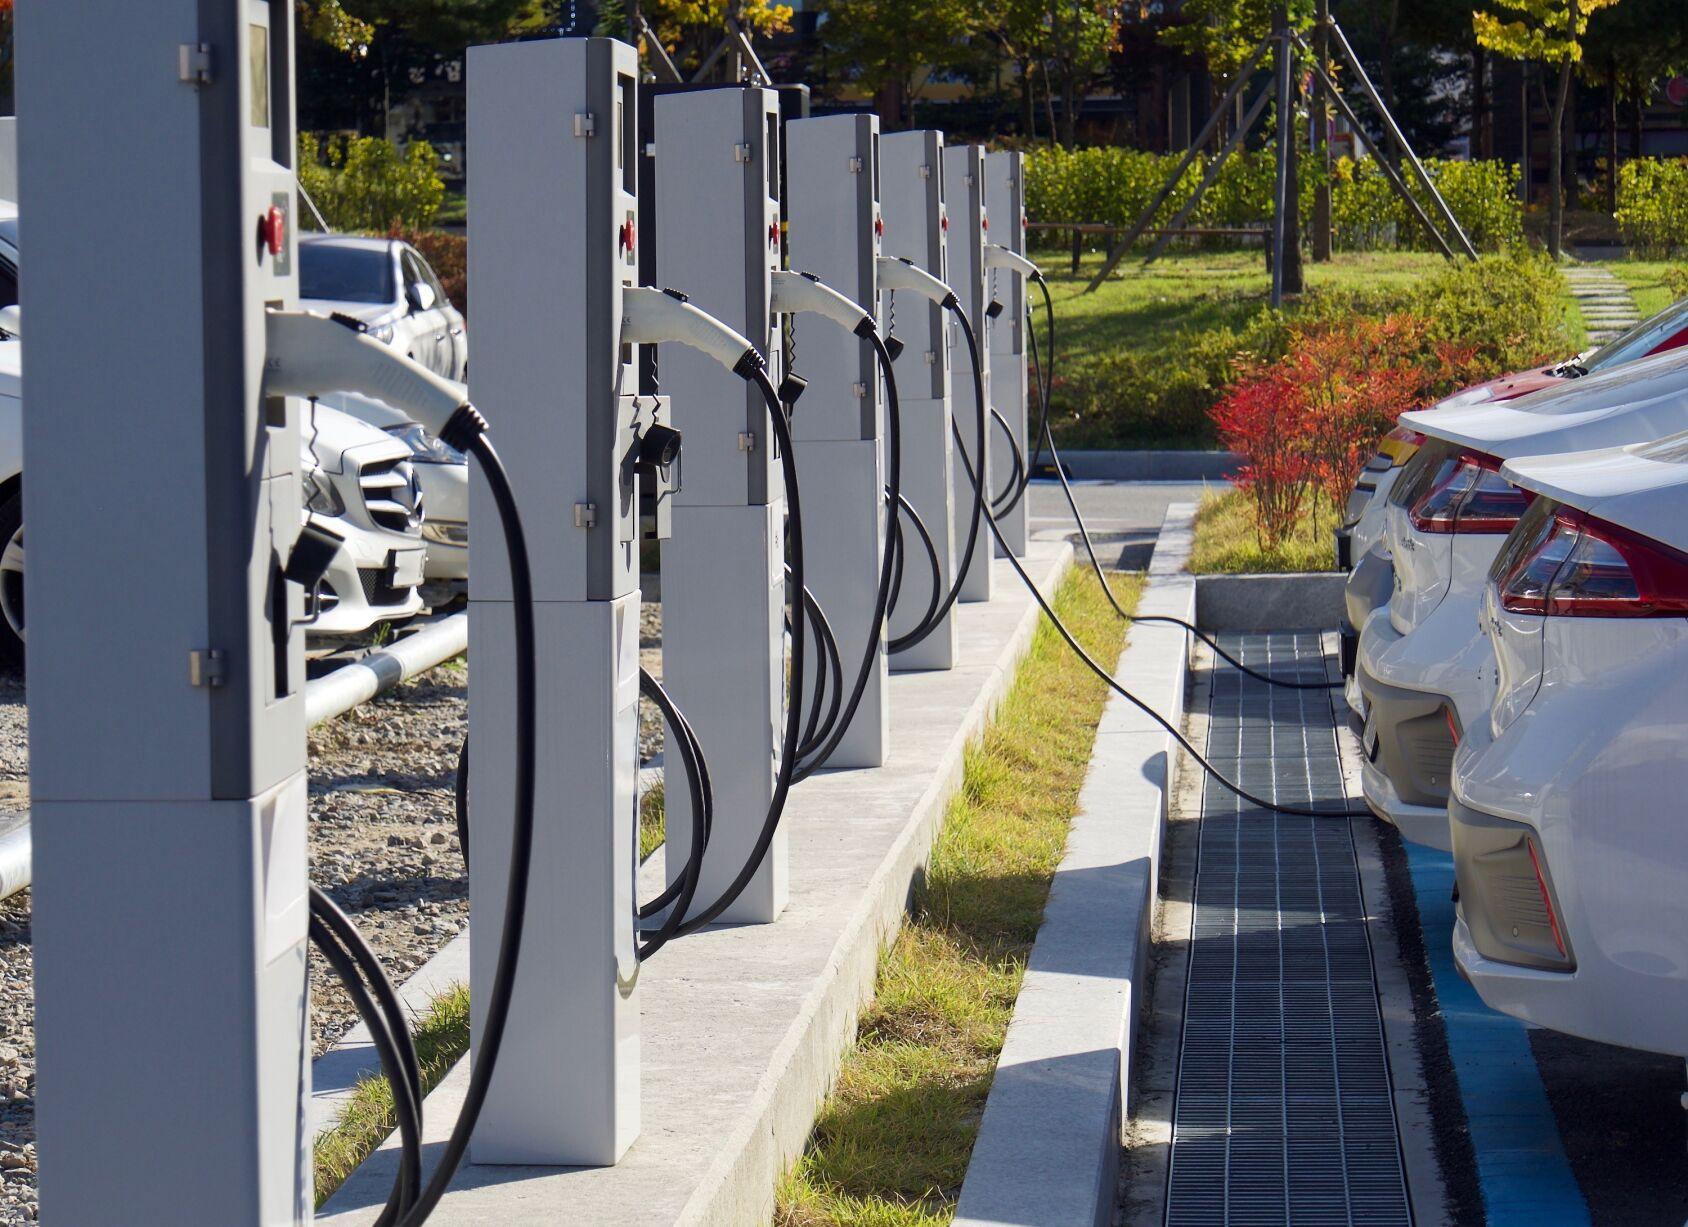 130M plan for electric vehicle charging stations receives